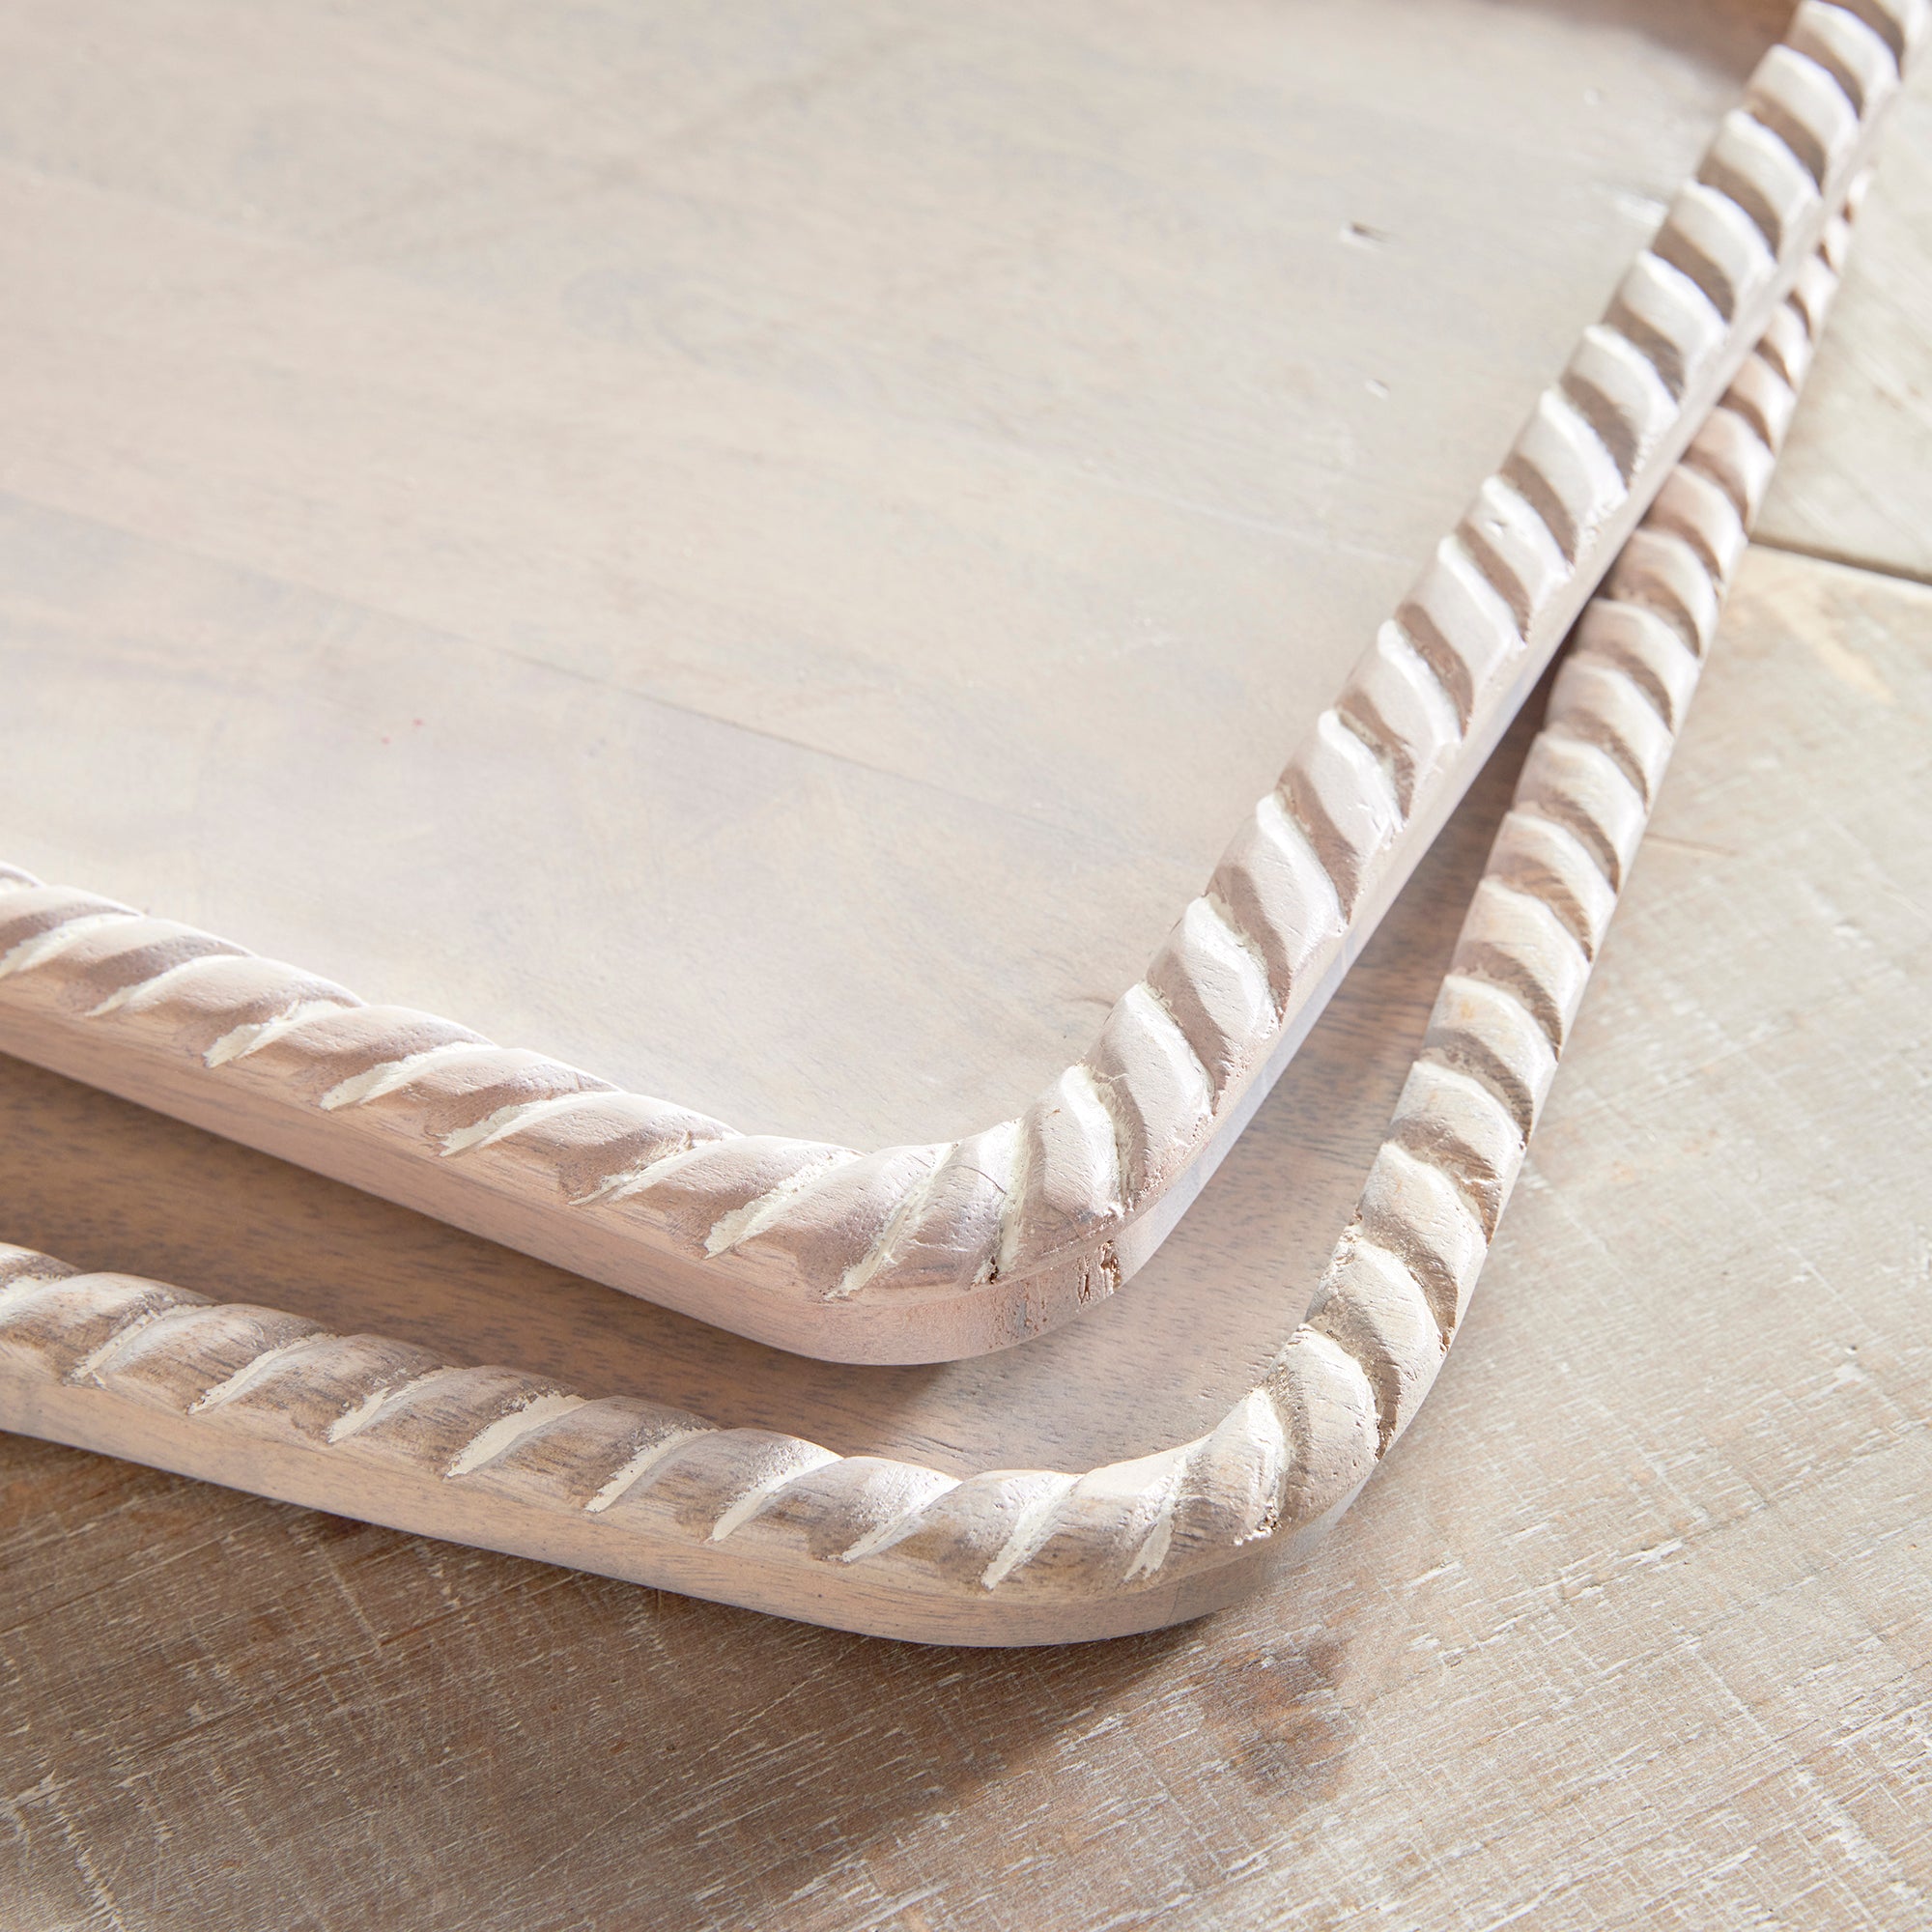 Hand carved from mango wood, this pair of trays is a sweet little accent for baked goods or a cheese tray. A little touch of natural wood tone is always on trend. Amethyst Home provides interior design, new construction, custom furniture, and area rugs in the Charlotte metro area.